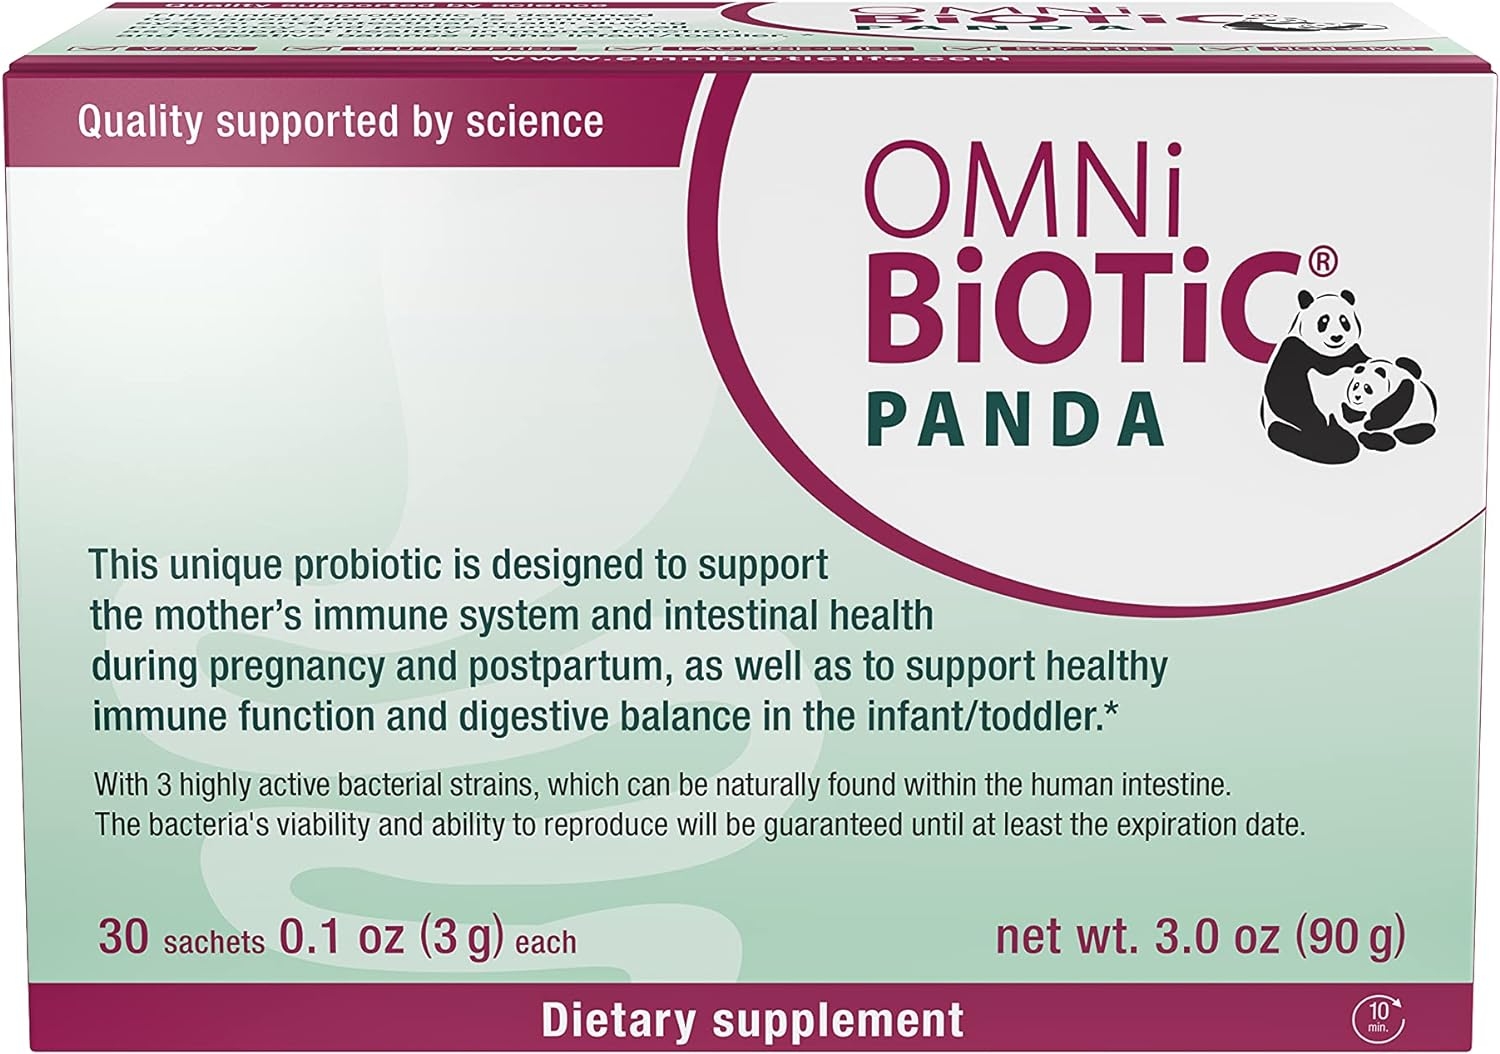 OMNi-BiOTiC Panda - Probiotic for Mom and Baby - Prenatal and Infant Probiotic – Gut Health & Immune System Support – Vegan and Hypoallergenic - Non-GMO (1 Pack)